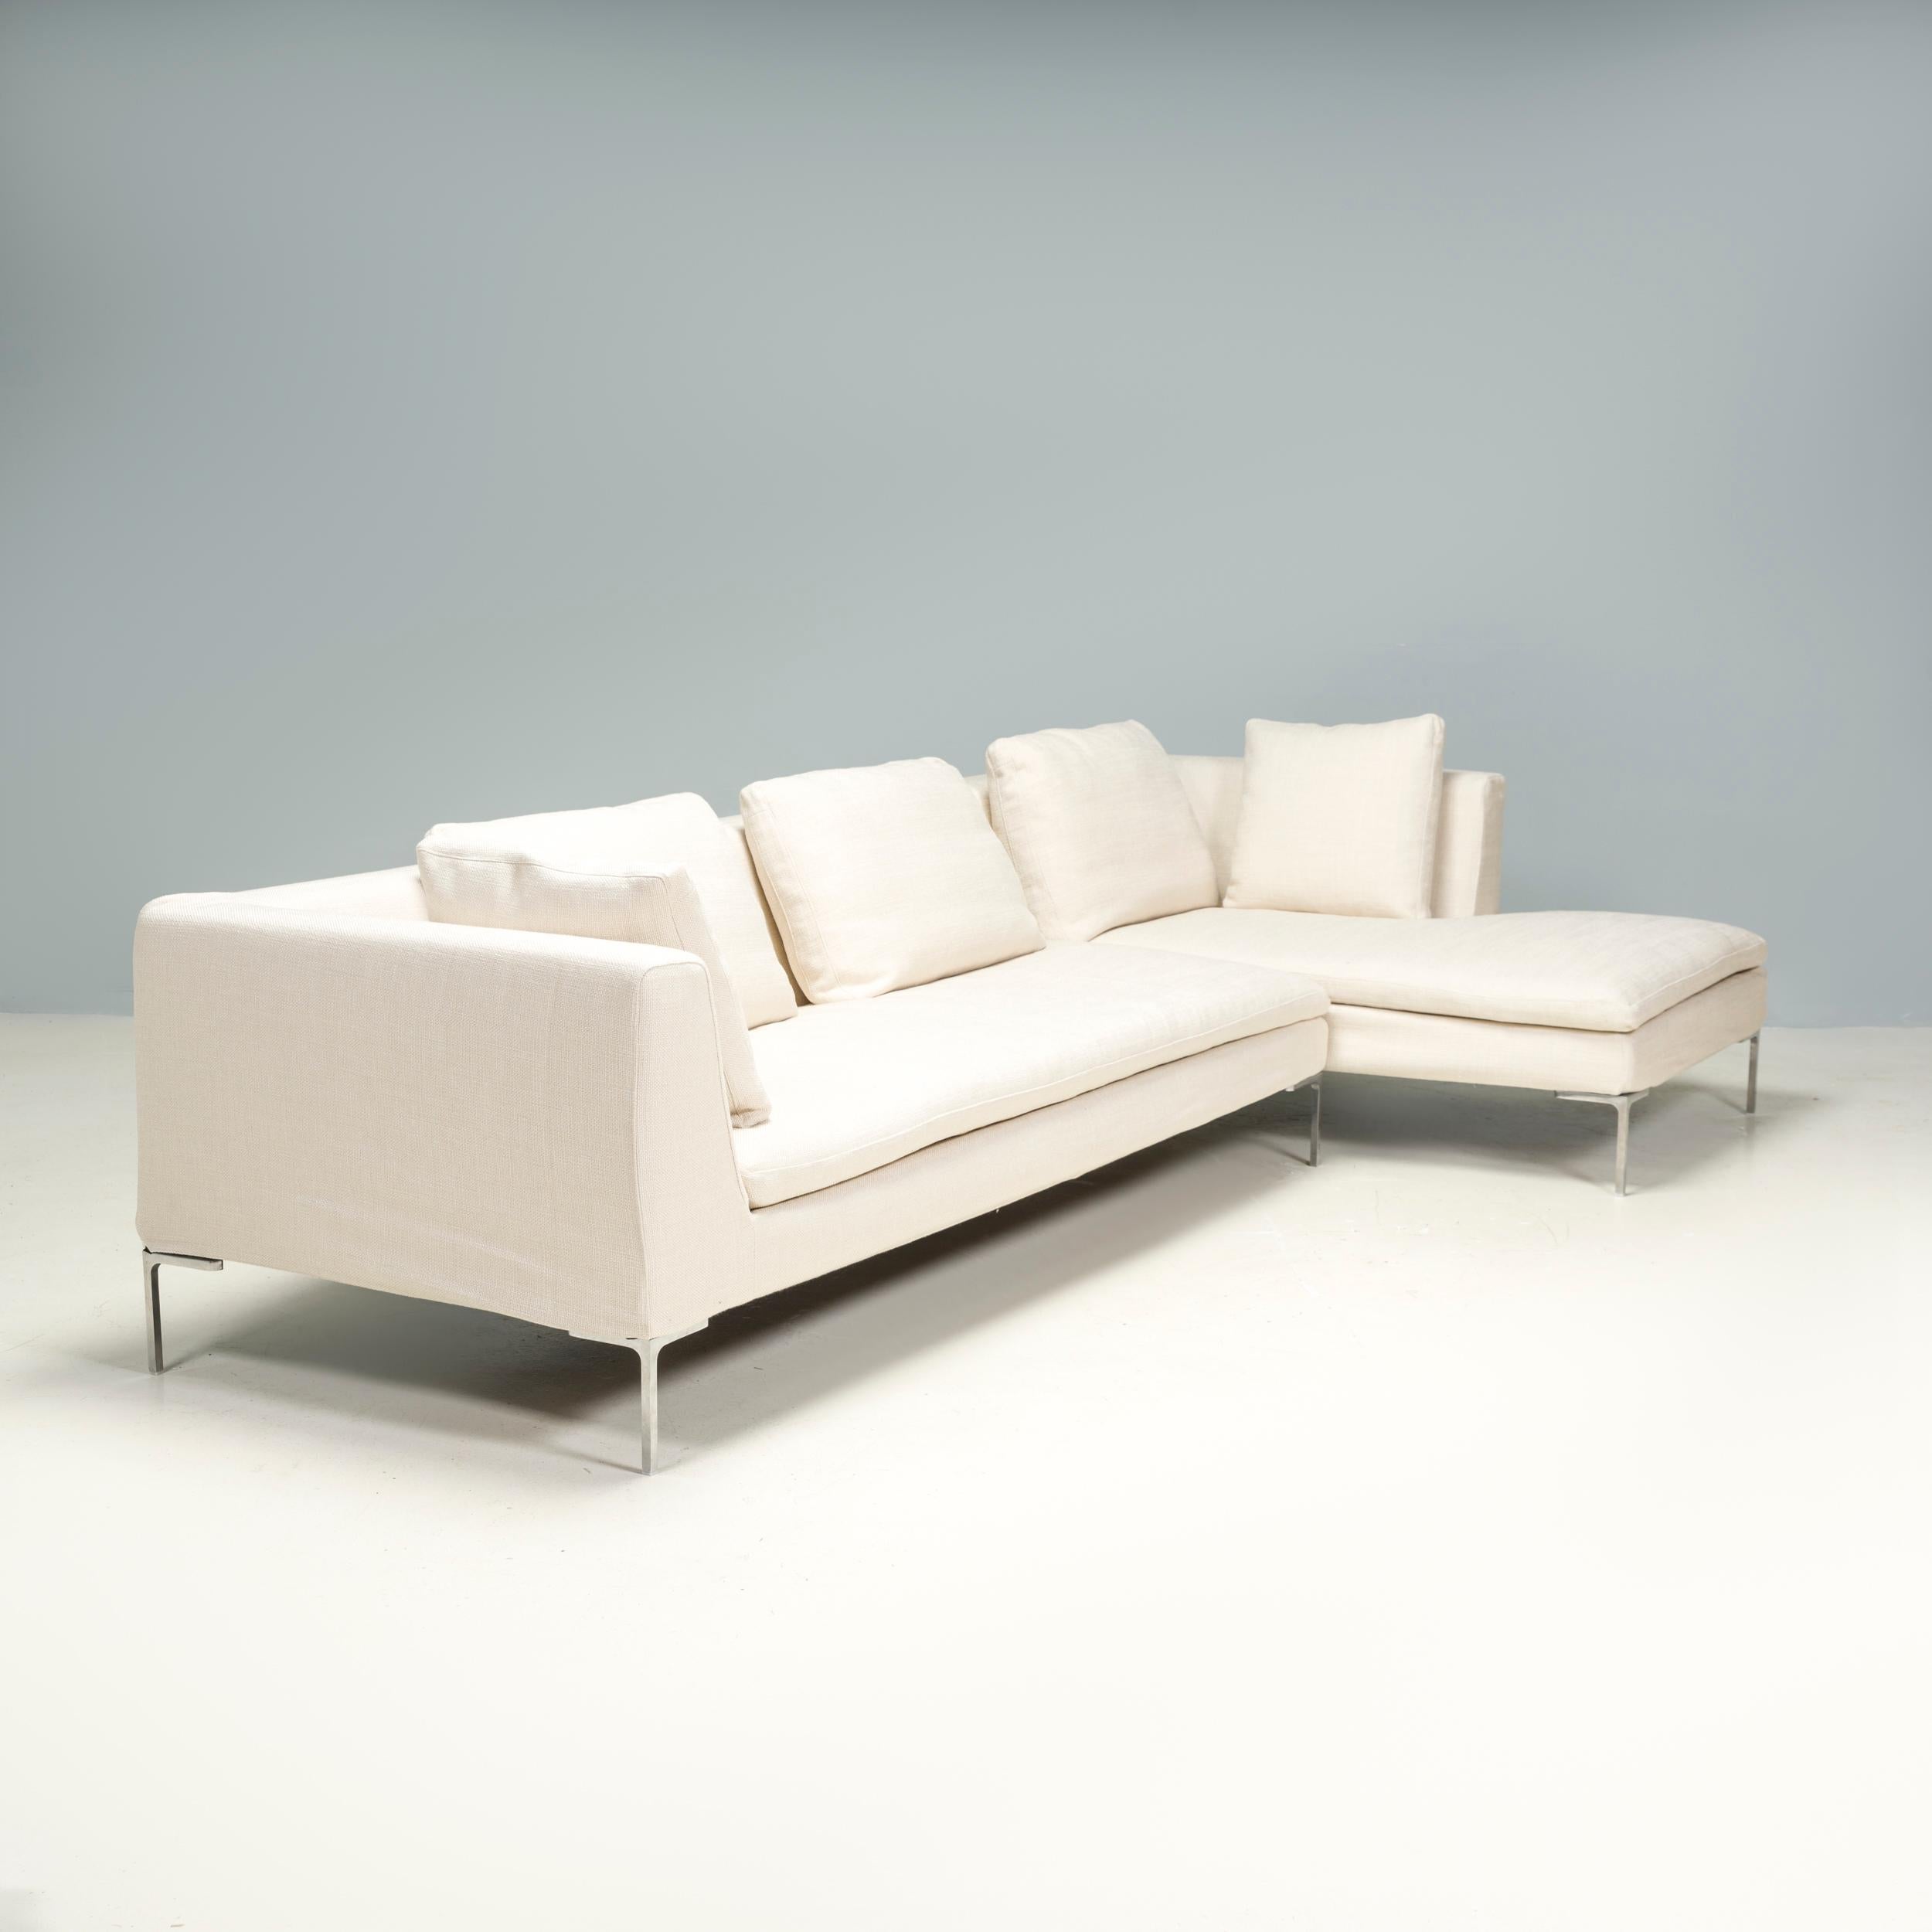 Originally designed by Antonio Citterio in 1997, the Charles sofa collection is manufactured by B&B Italia and is a fantastic example of contemporary Italian design.

Inspired by and named in tribute to the legendary designer Charles Eames, the